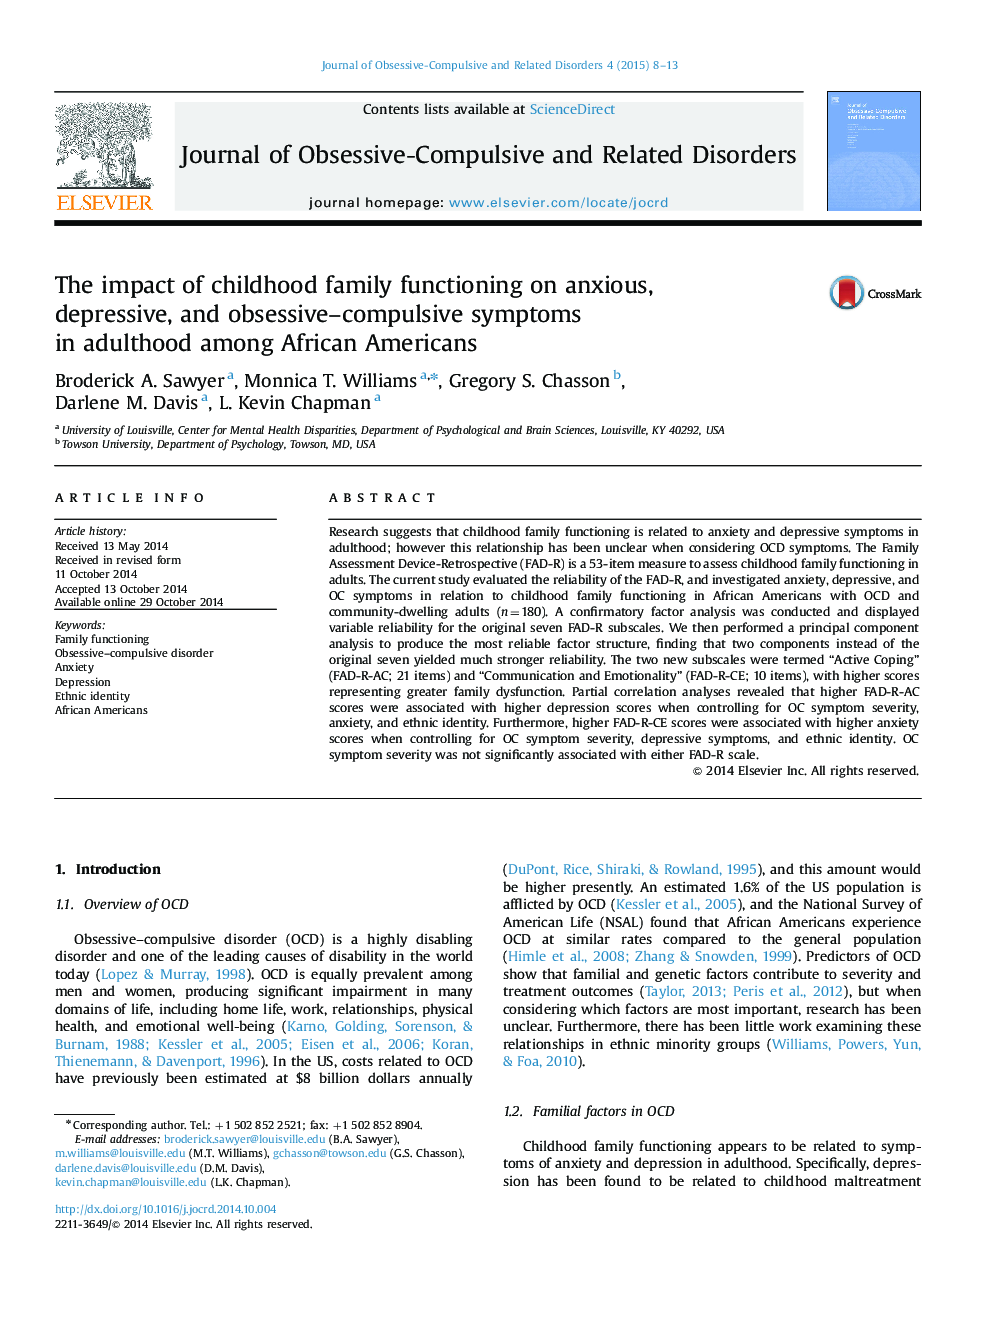 The impact of childhood family functioning on anxious, depressive, and obsessive–compulsive symptoms in adulthood among African Americans